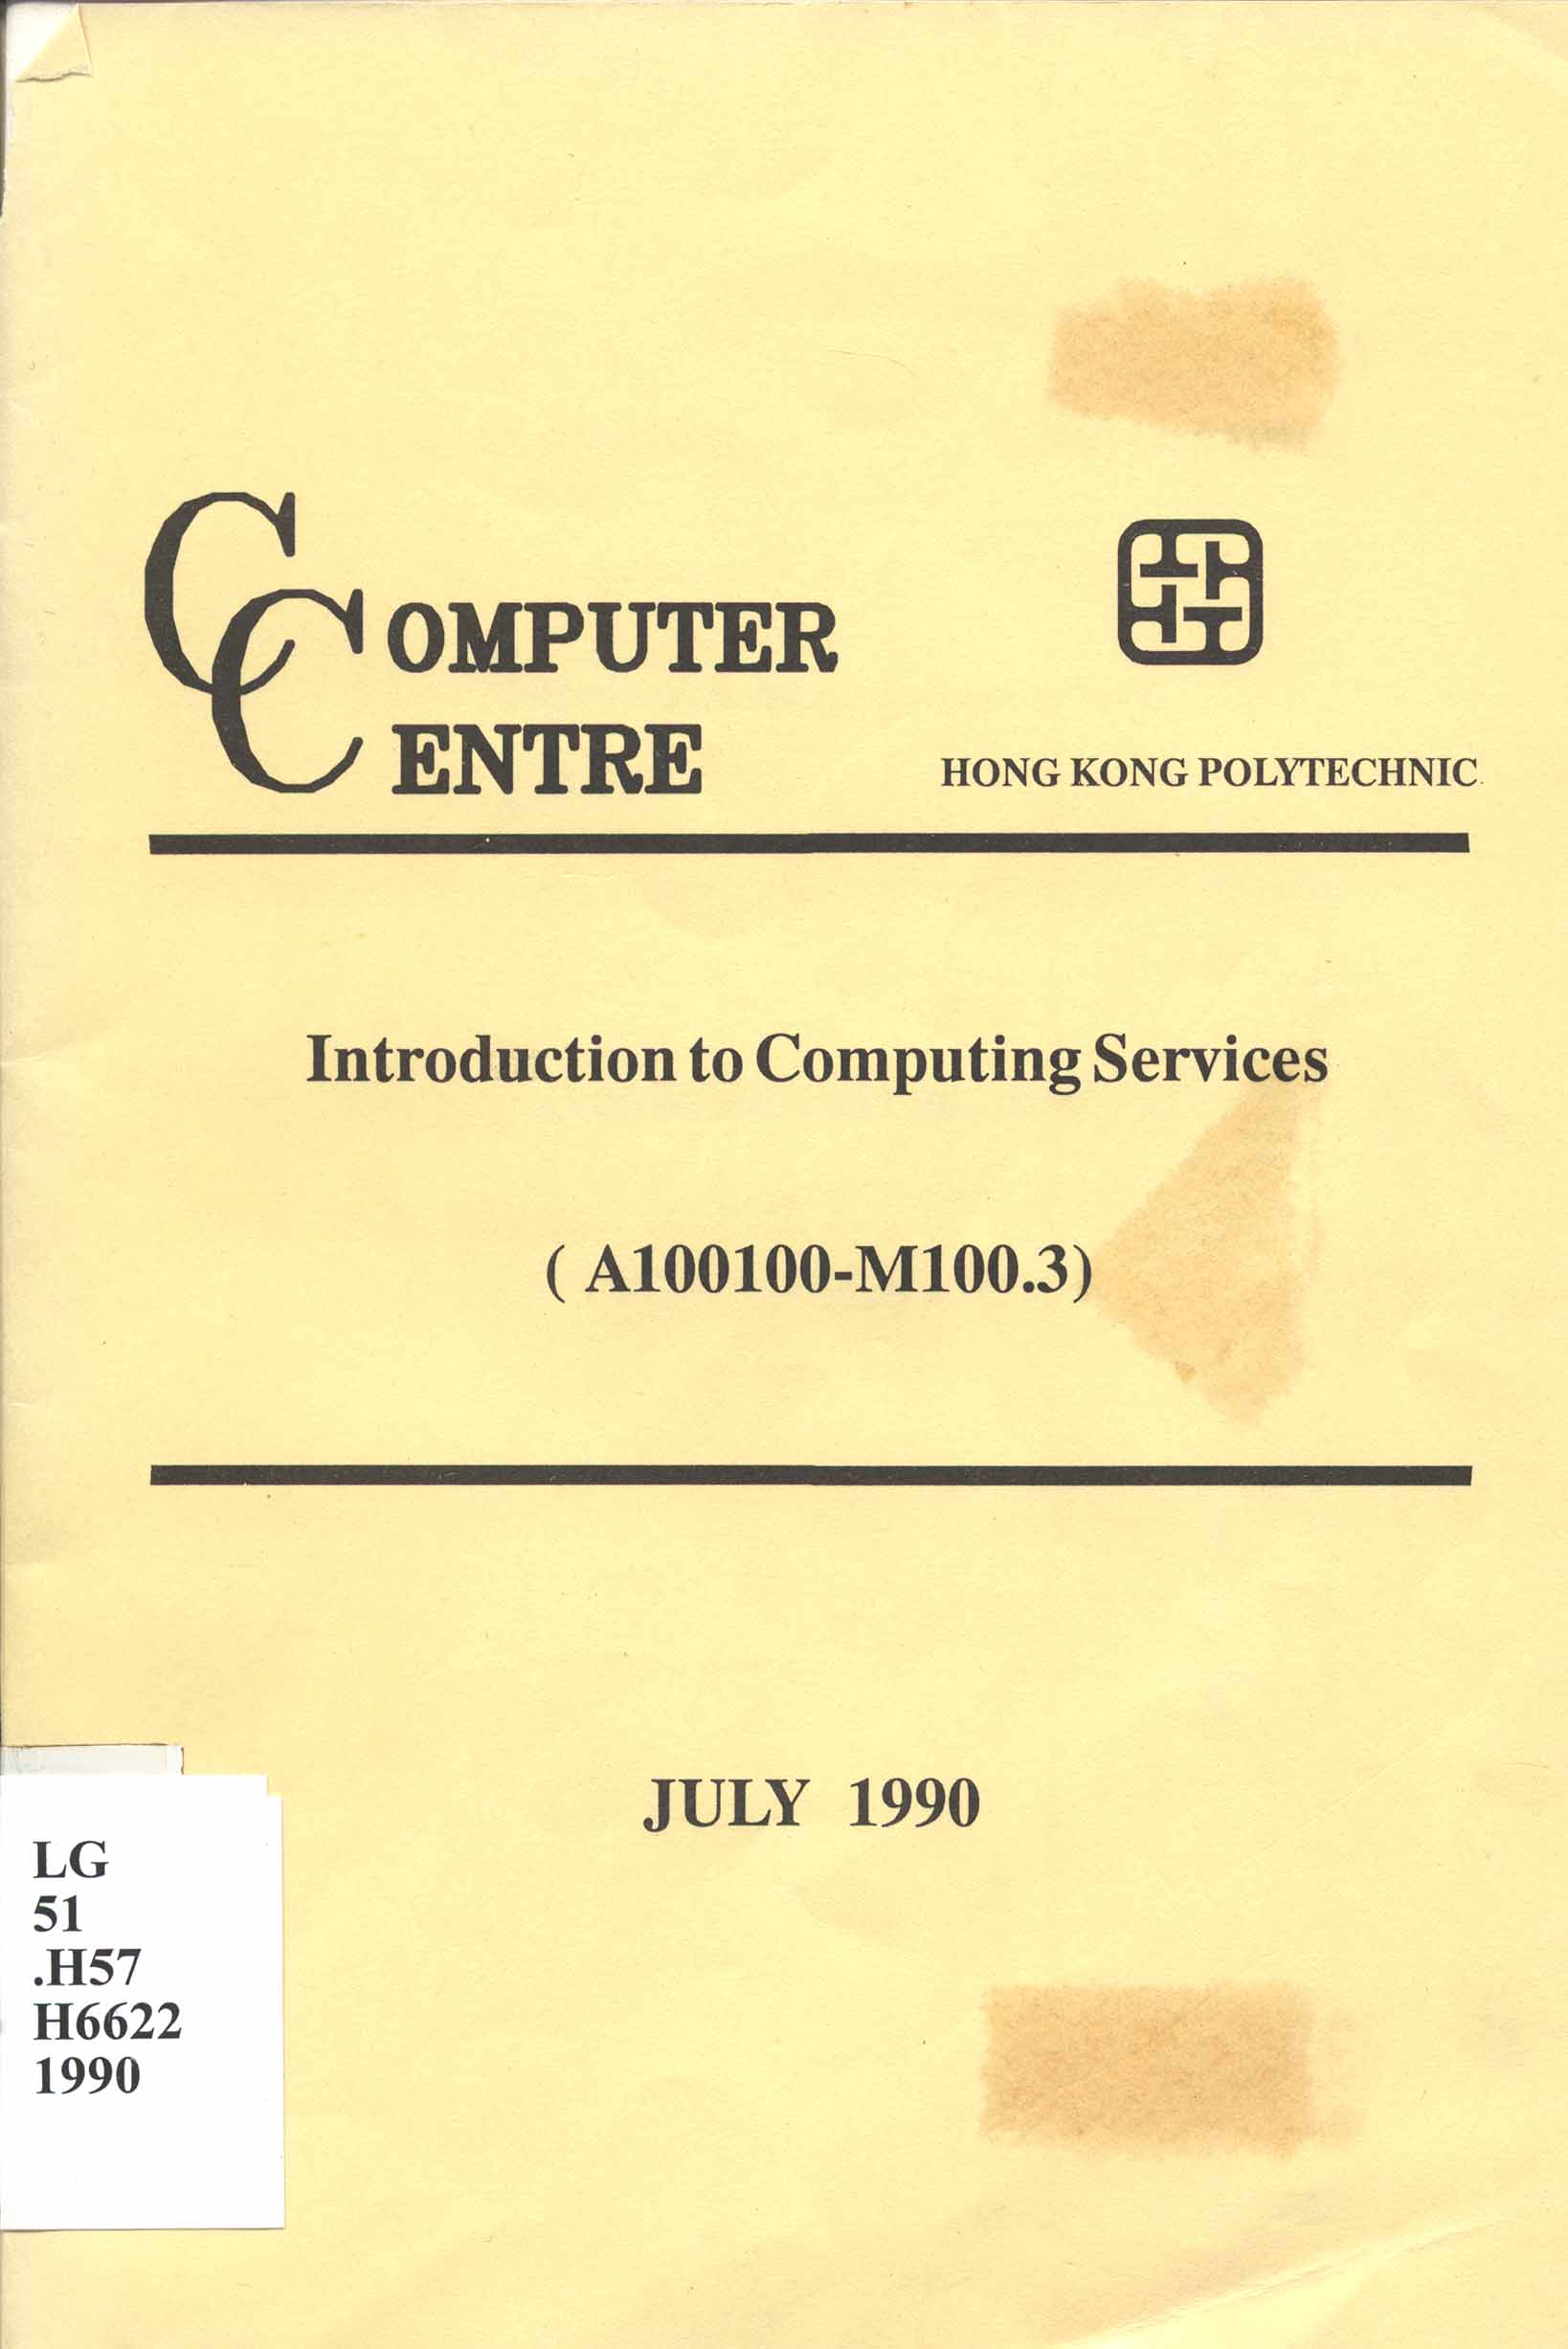 Introduction to computing services [1990]